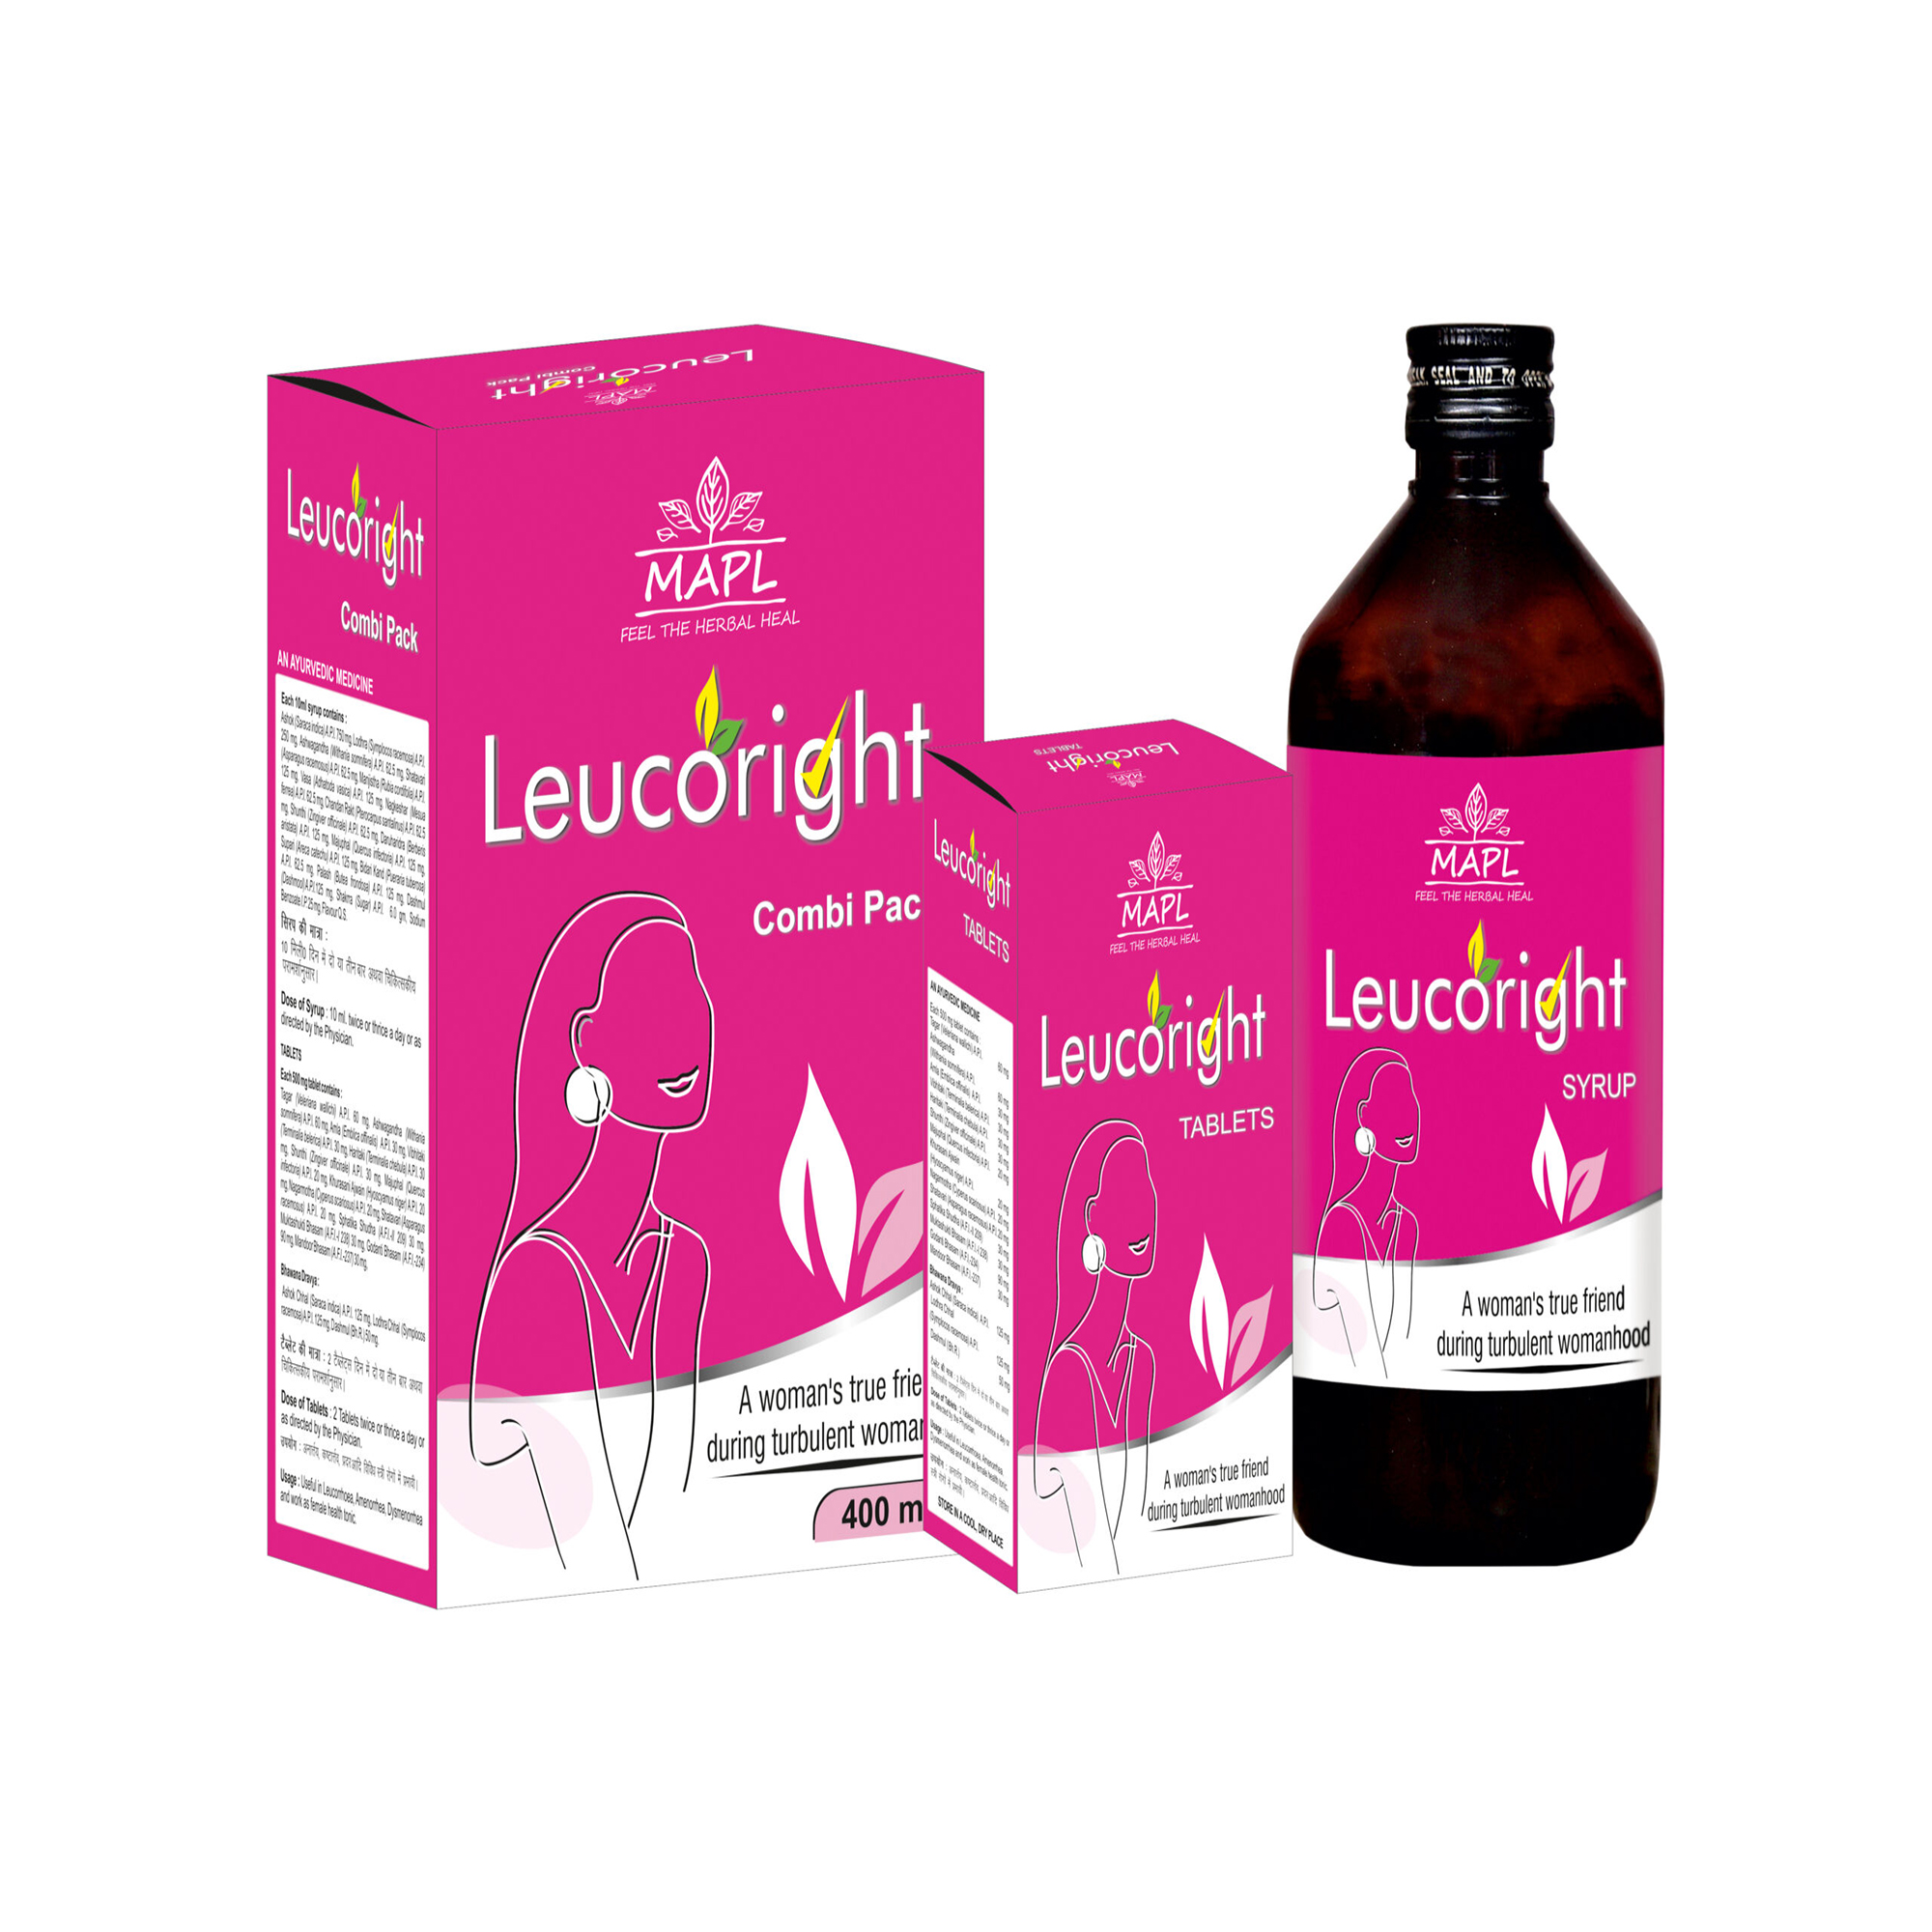 Leucoright Syrup and Tablet Combi Pack 400ml